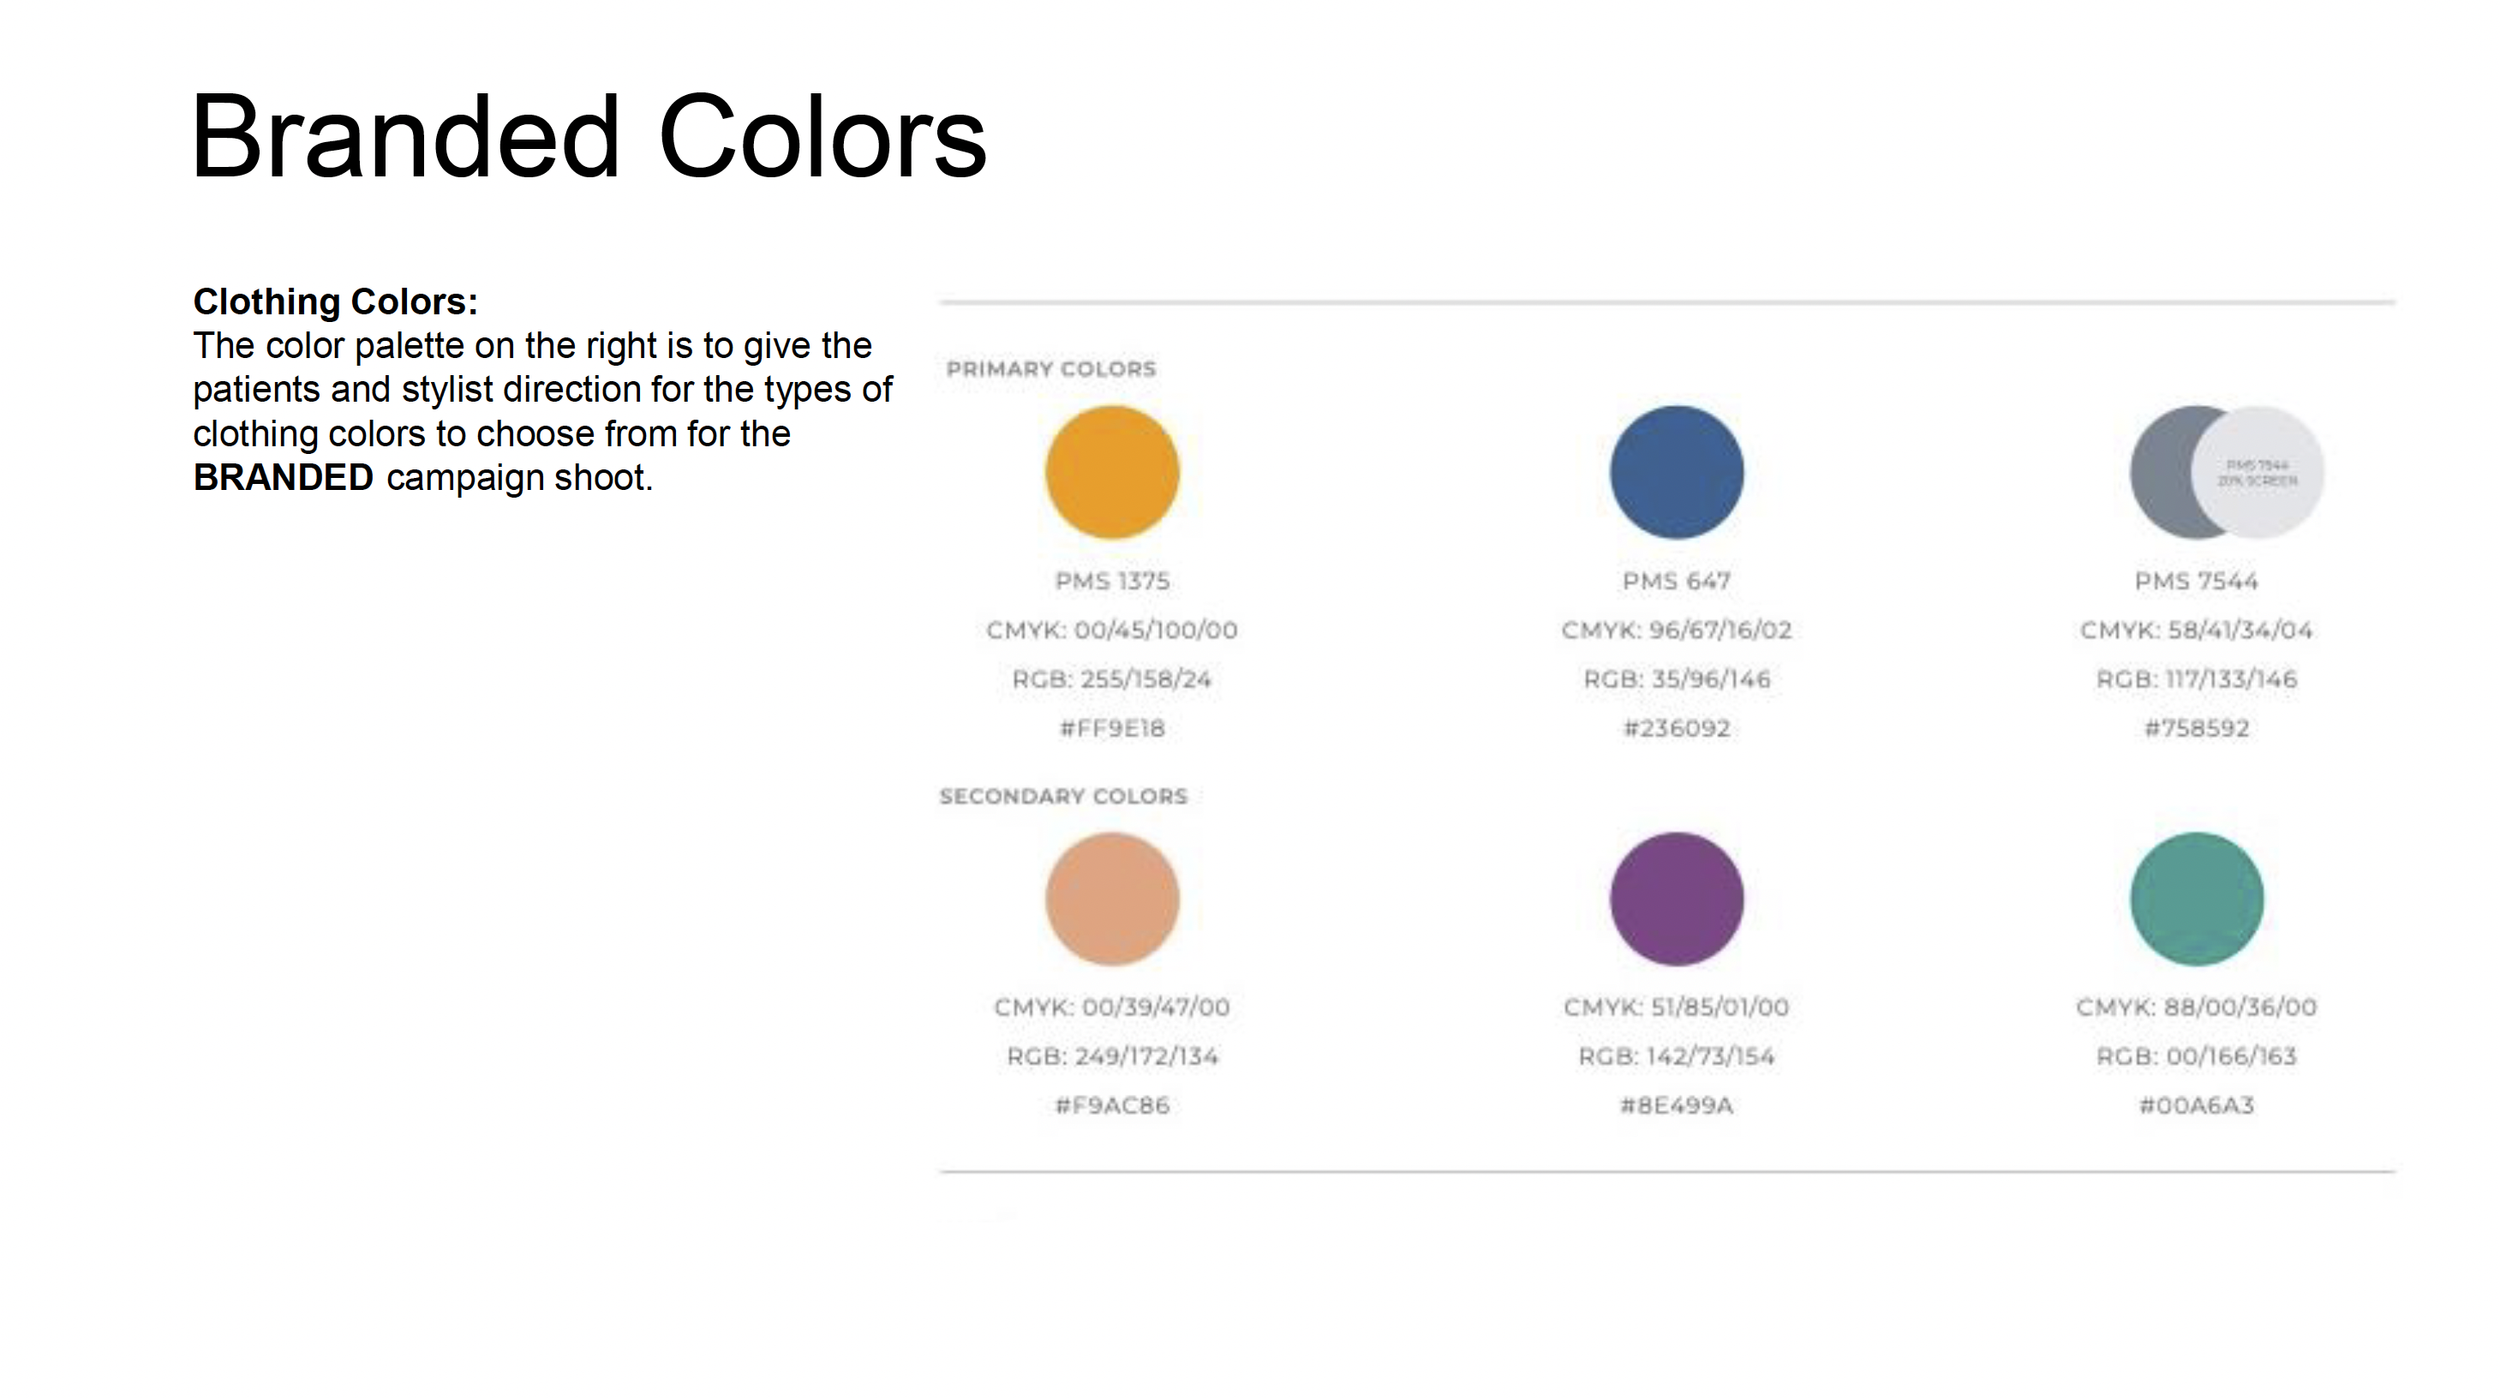 Branded Colors.png